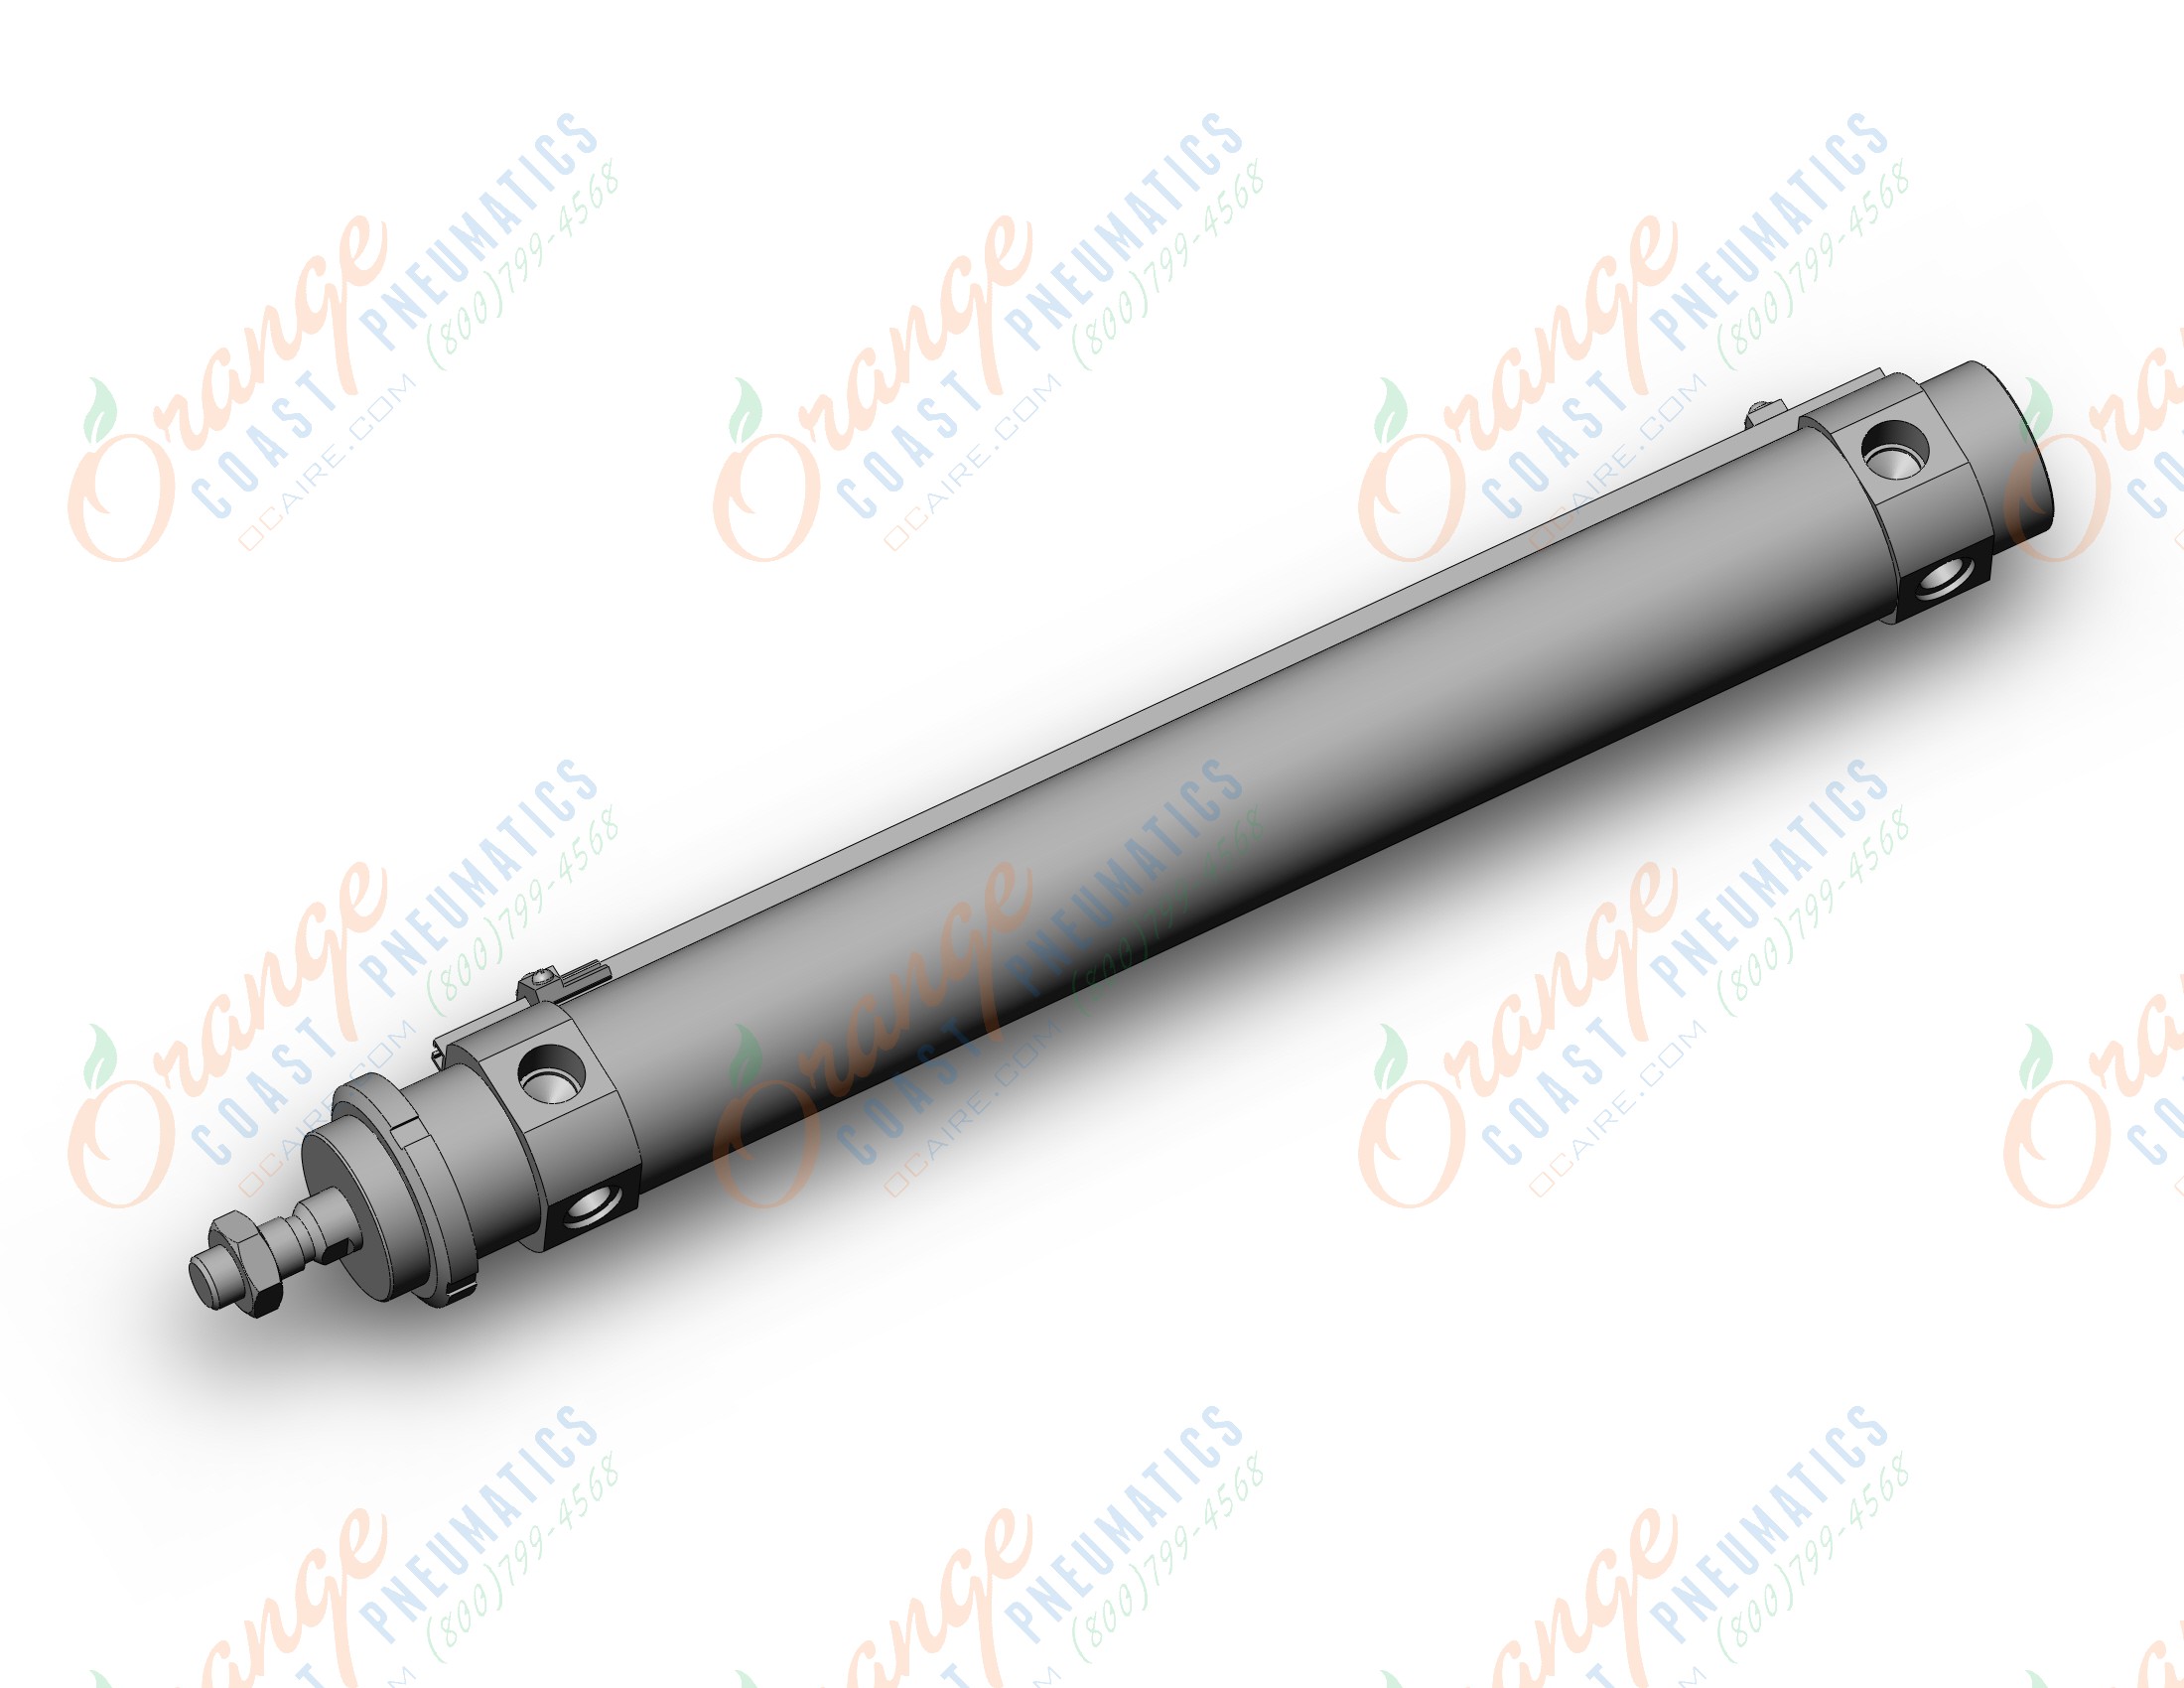 SMC CD75E40-250-A cylinder, air, standard, ISO ROUND BODY CYLINDER, C75, C76